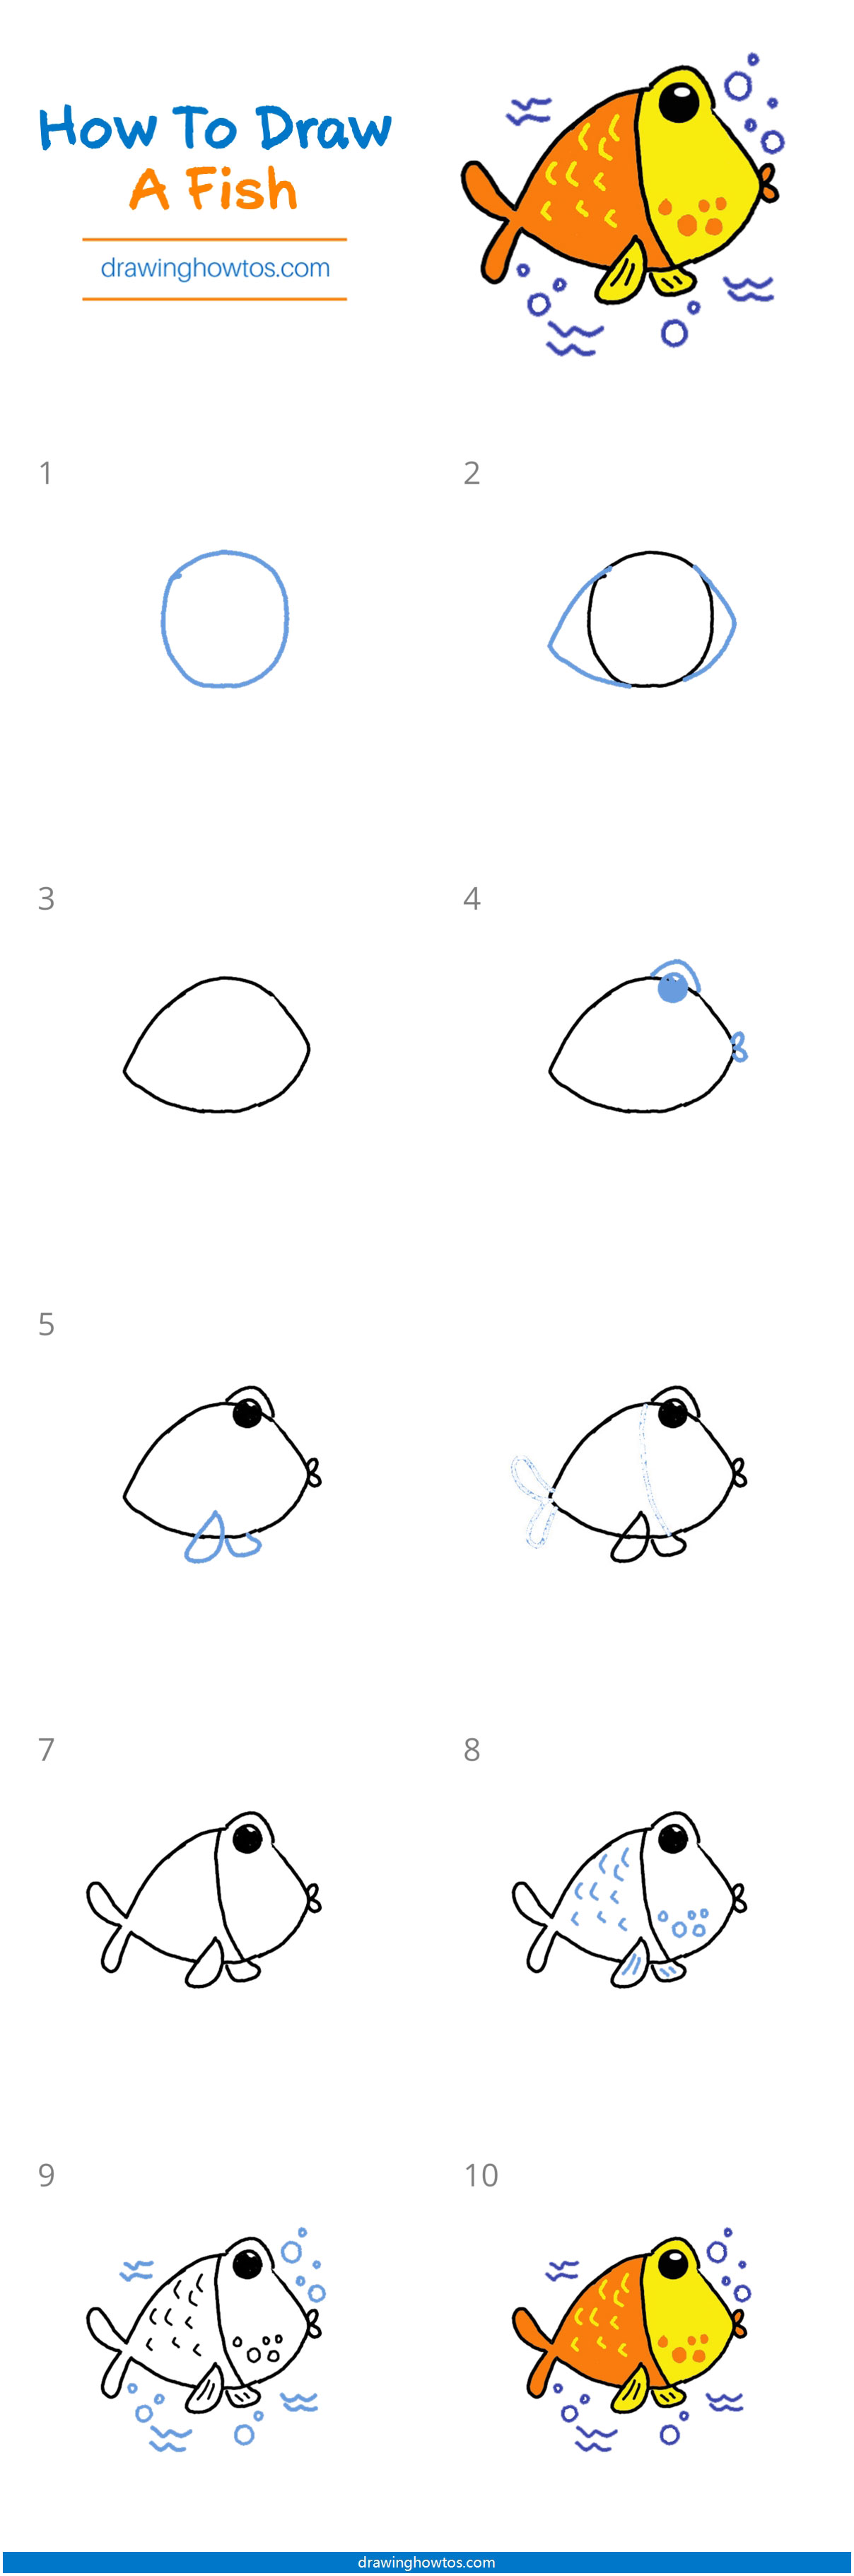 How to Draw a Fish Step by Step